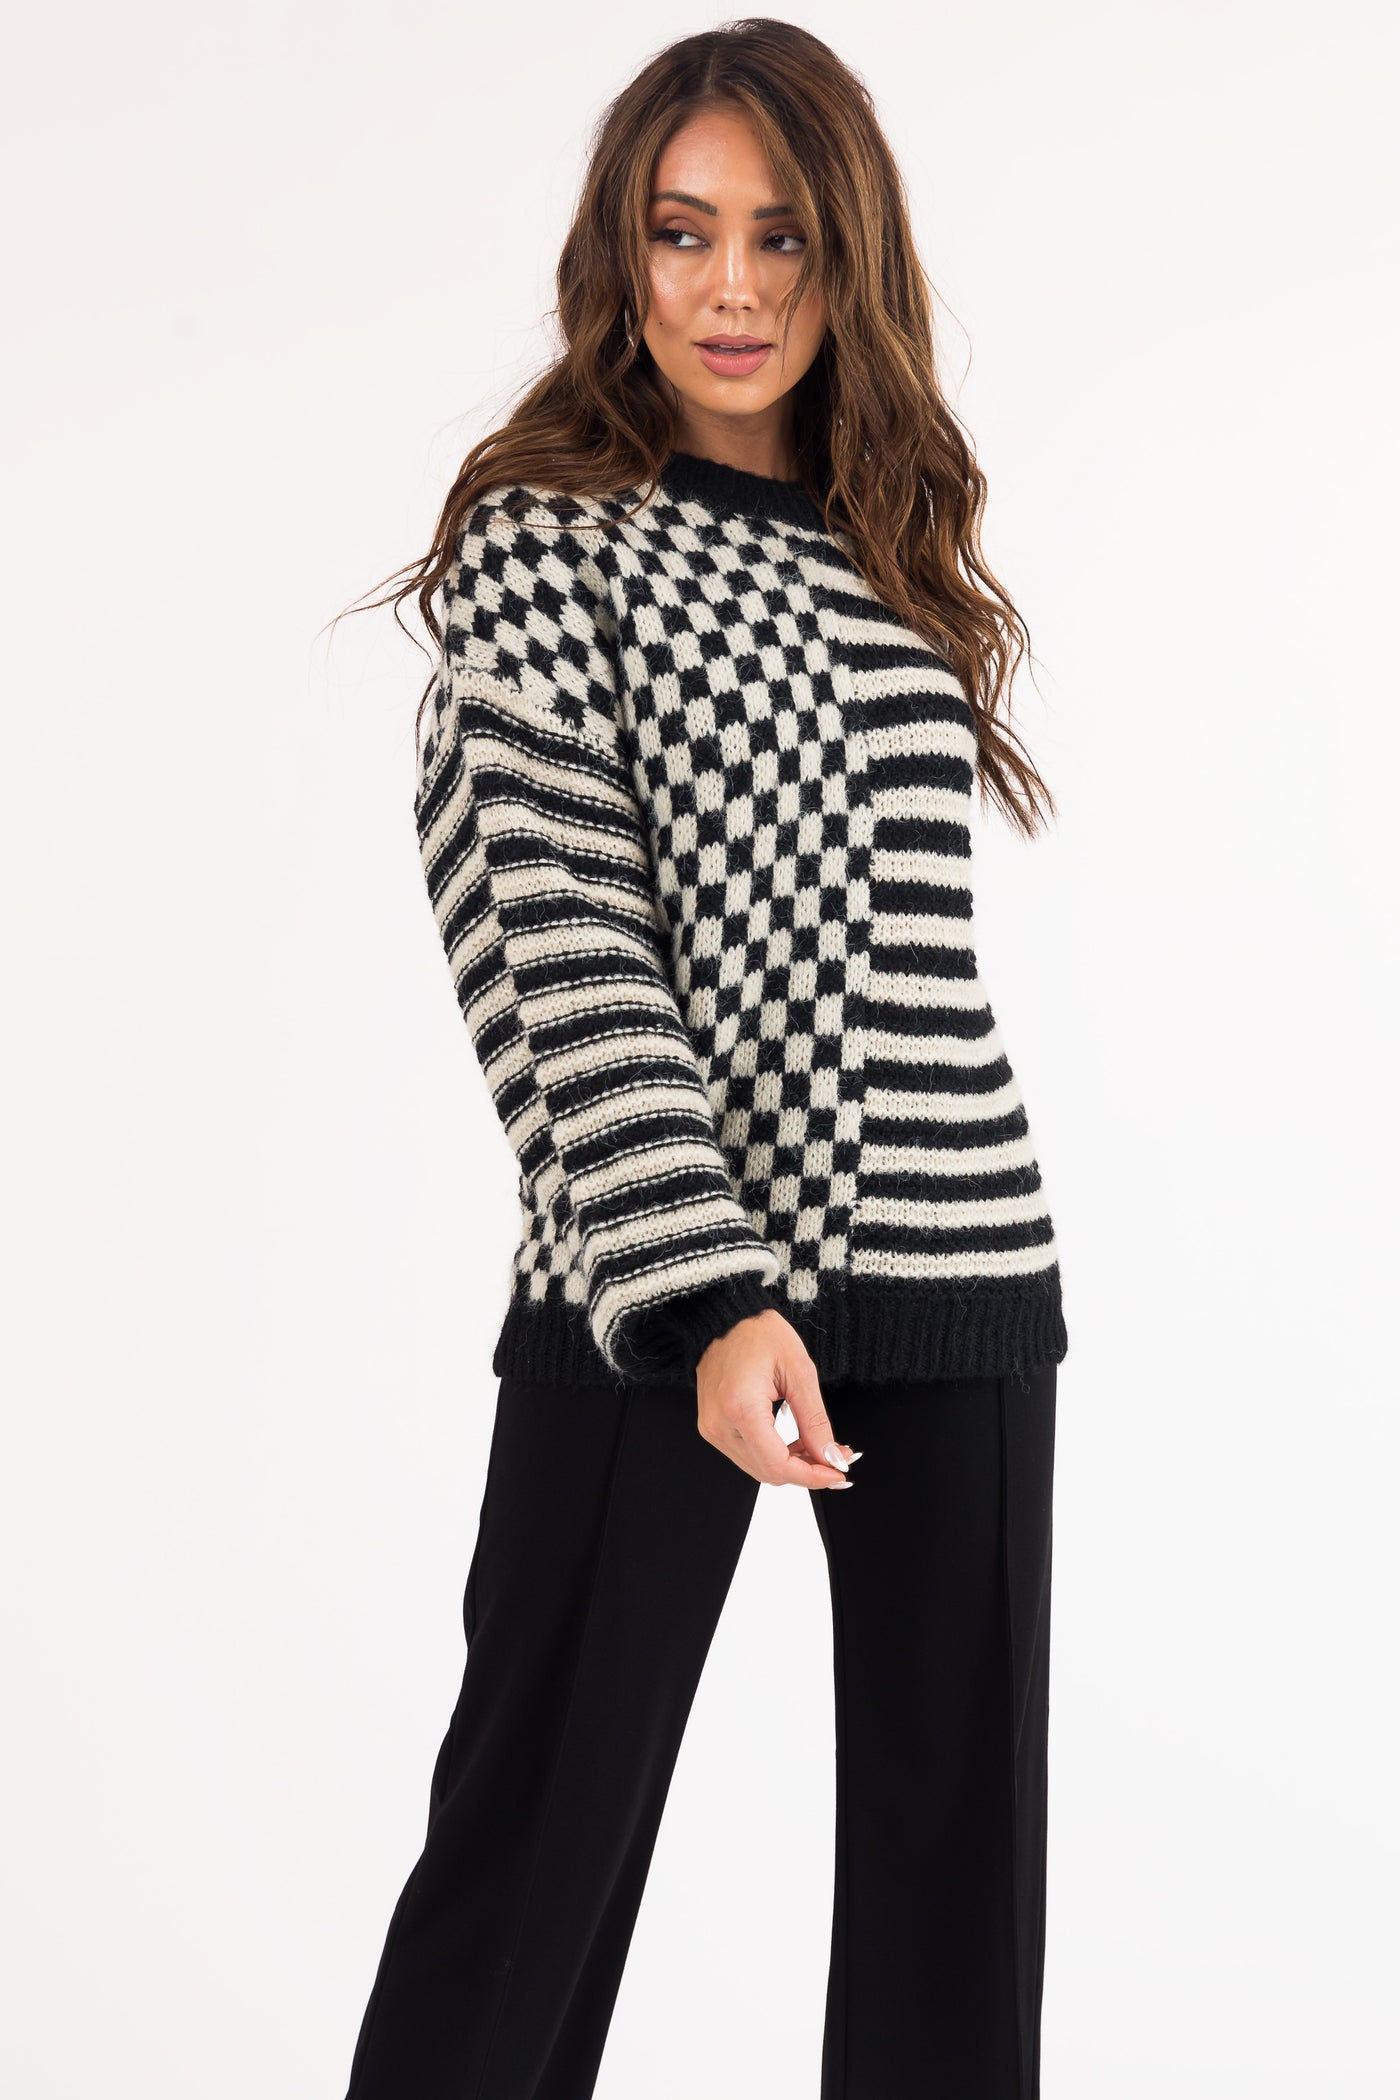 Black Checkered and Striped Fuzzy Knit Sweater